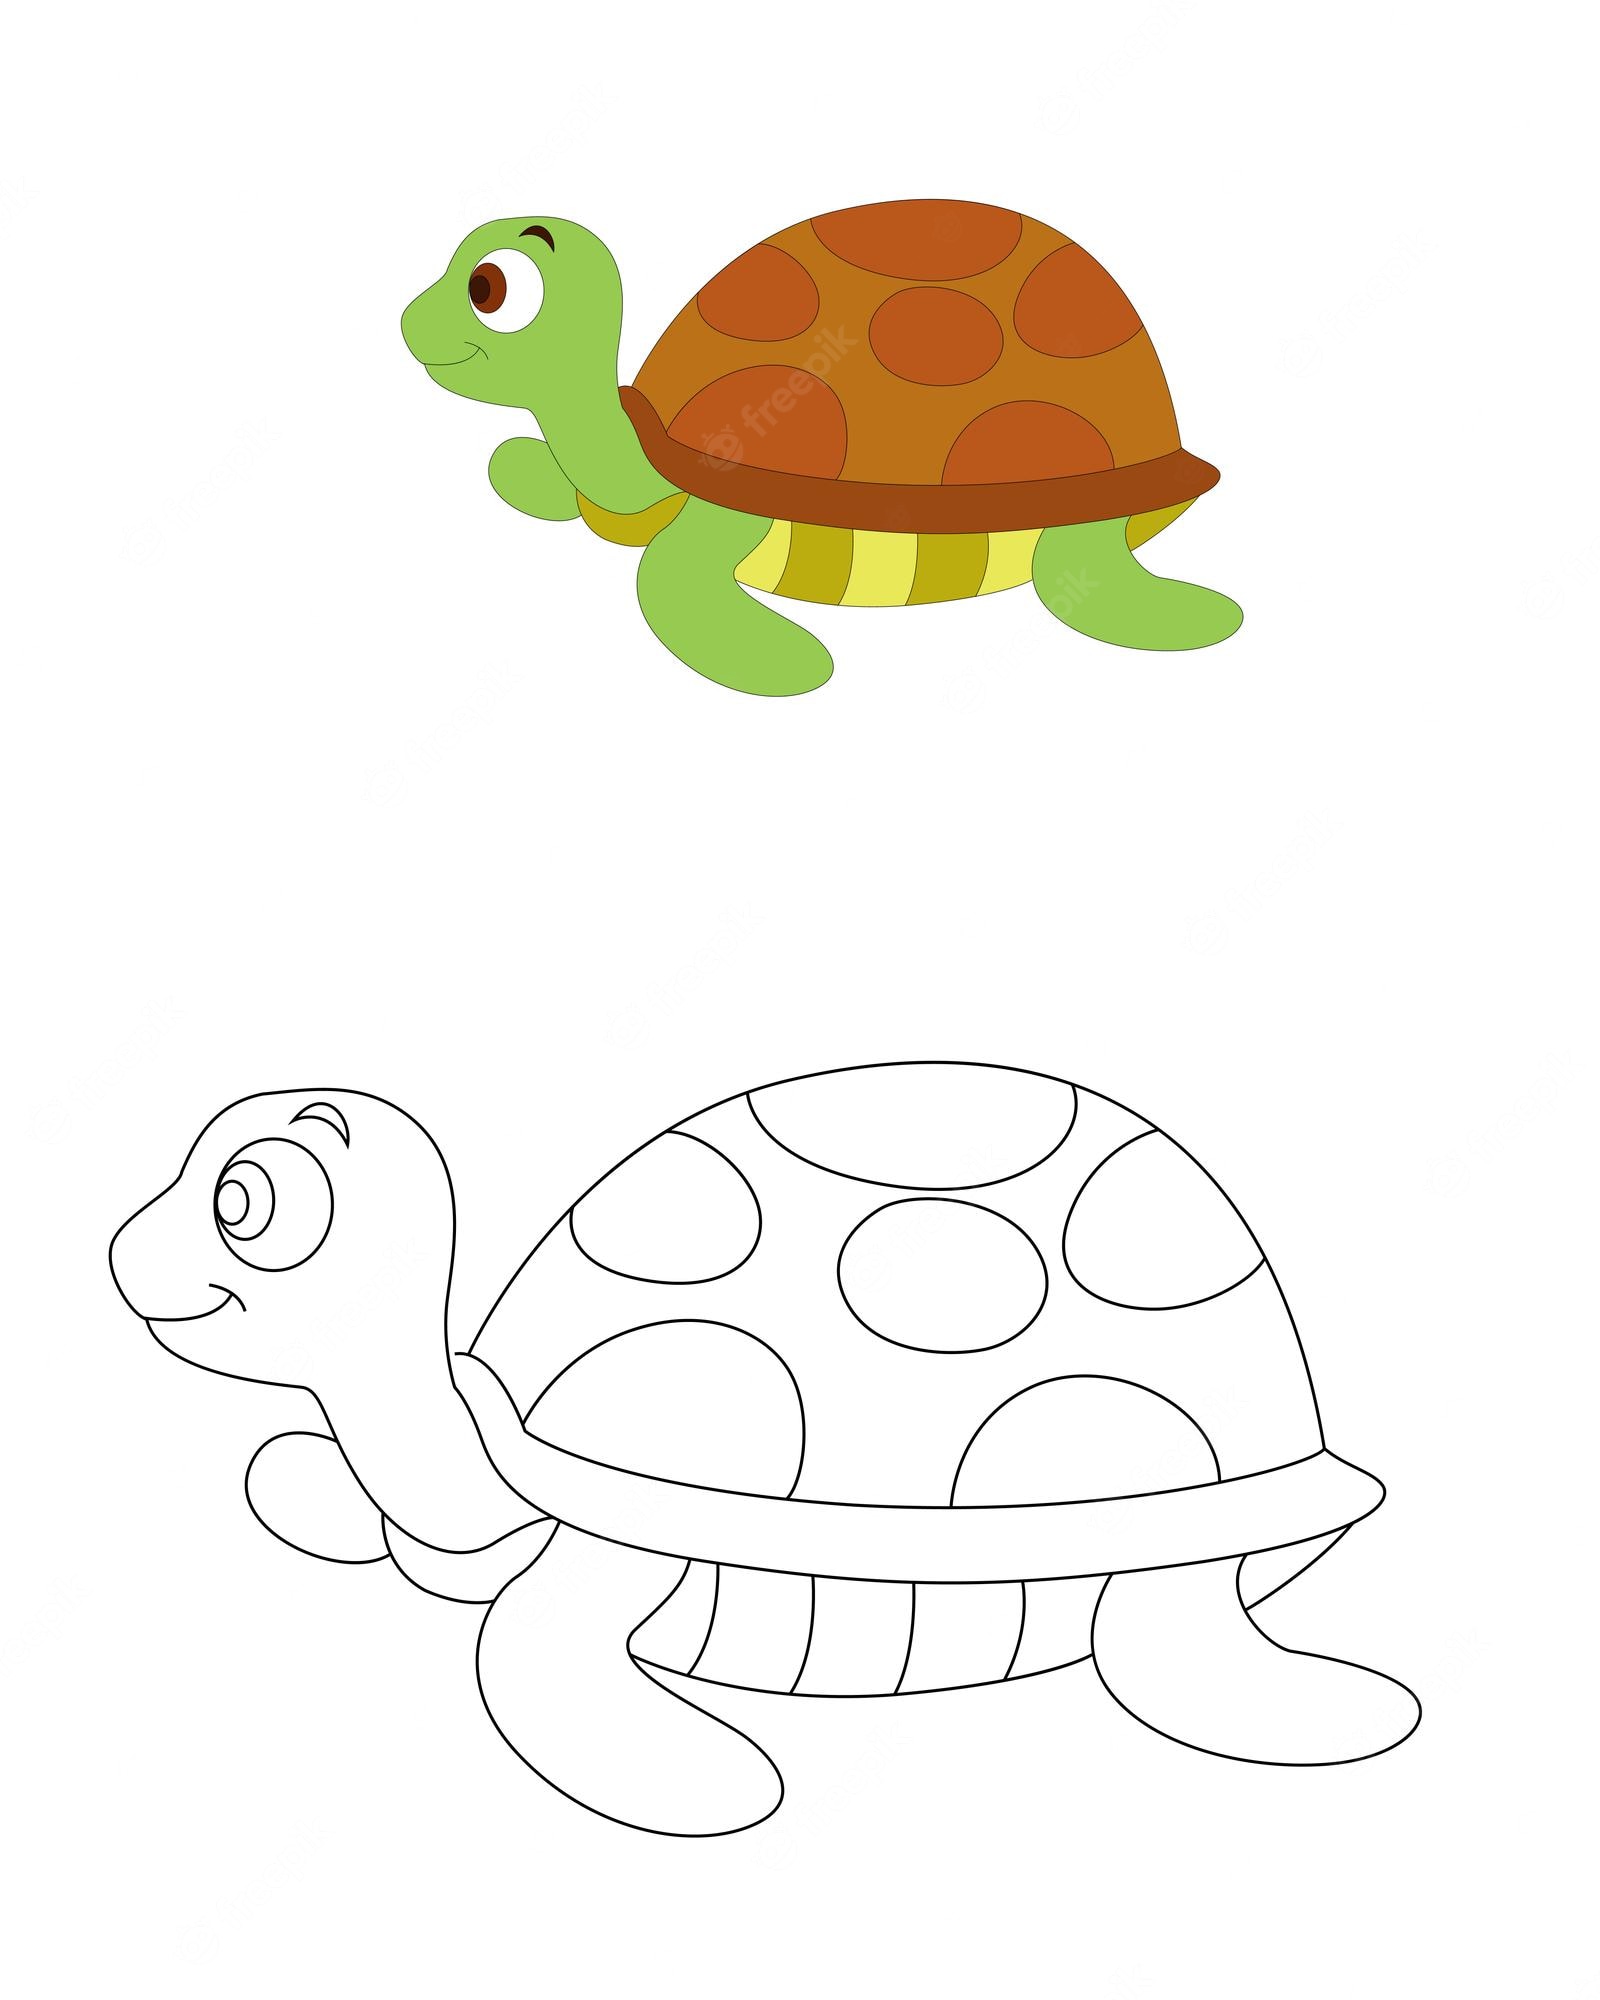 How To Draw a Turtle - Easy Step By Step Guide for Kids